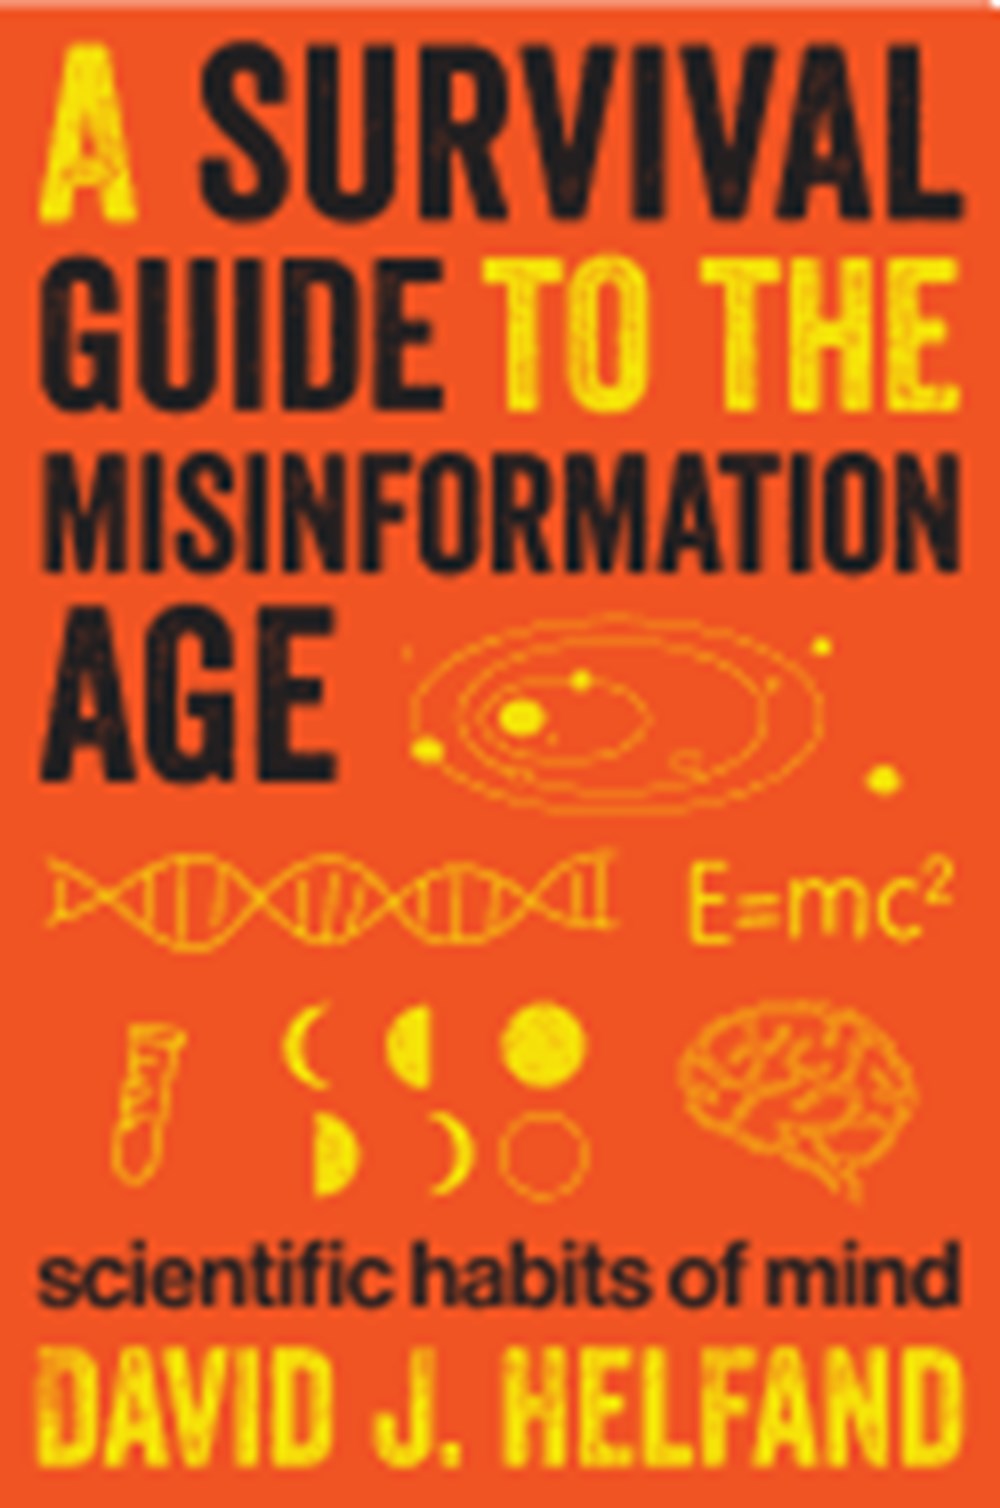 Survival Guide to the Misinformation Age: Scientific Habits of Mind